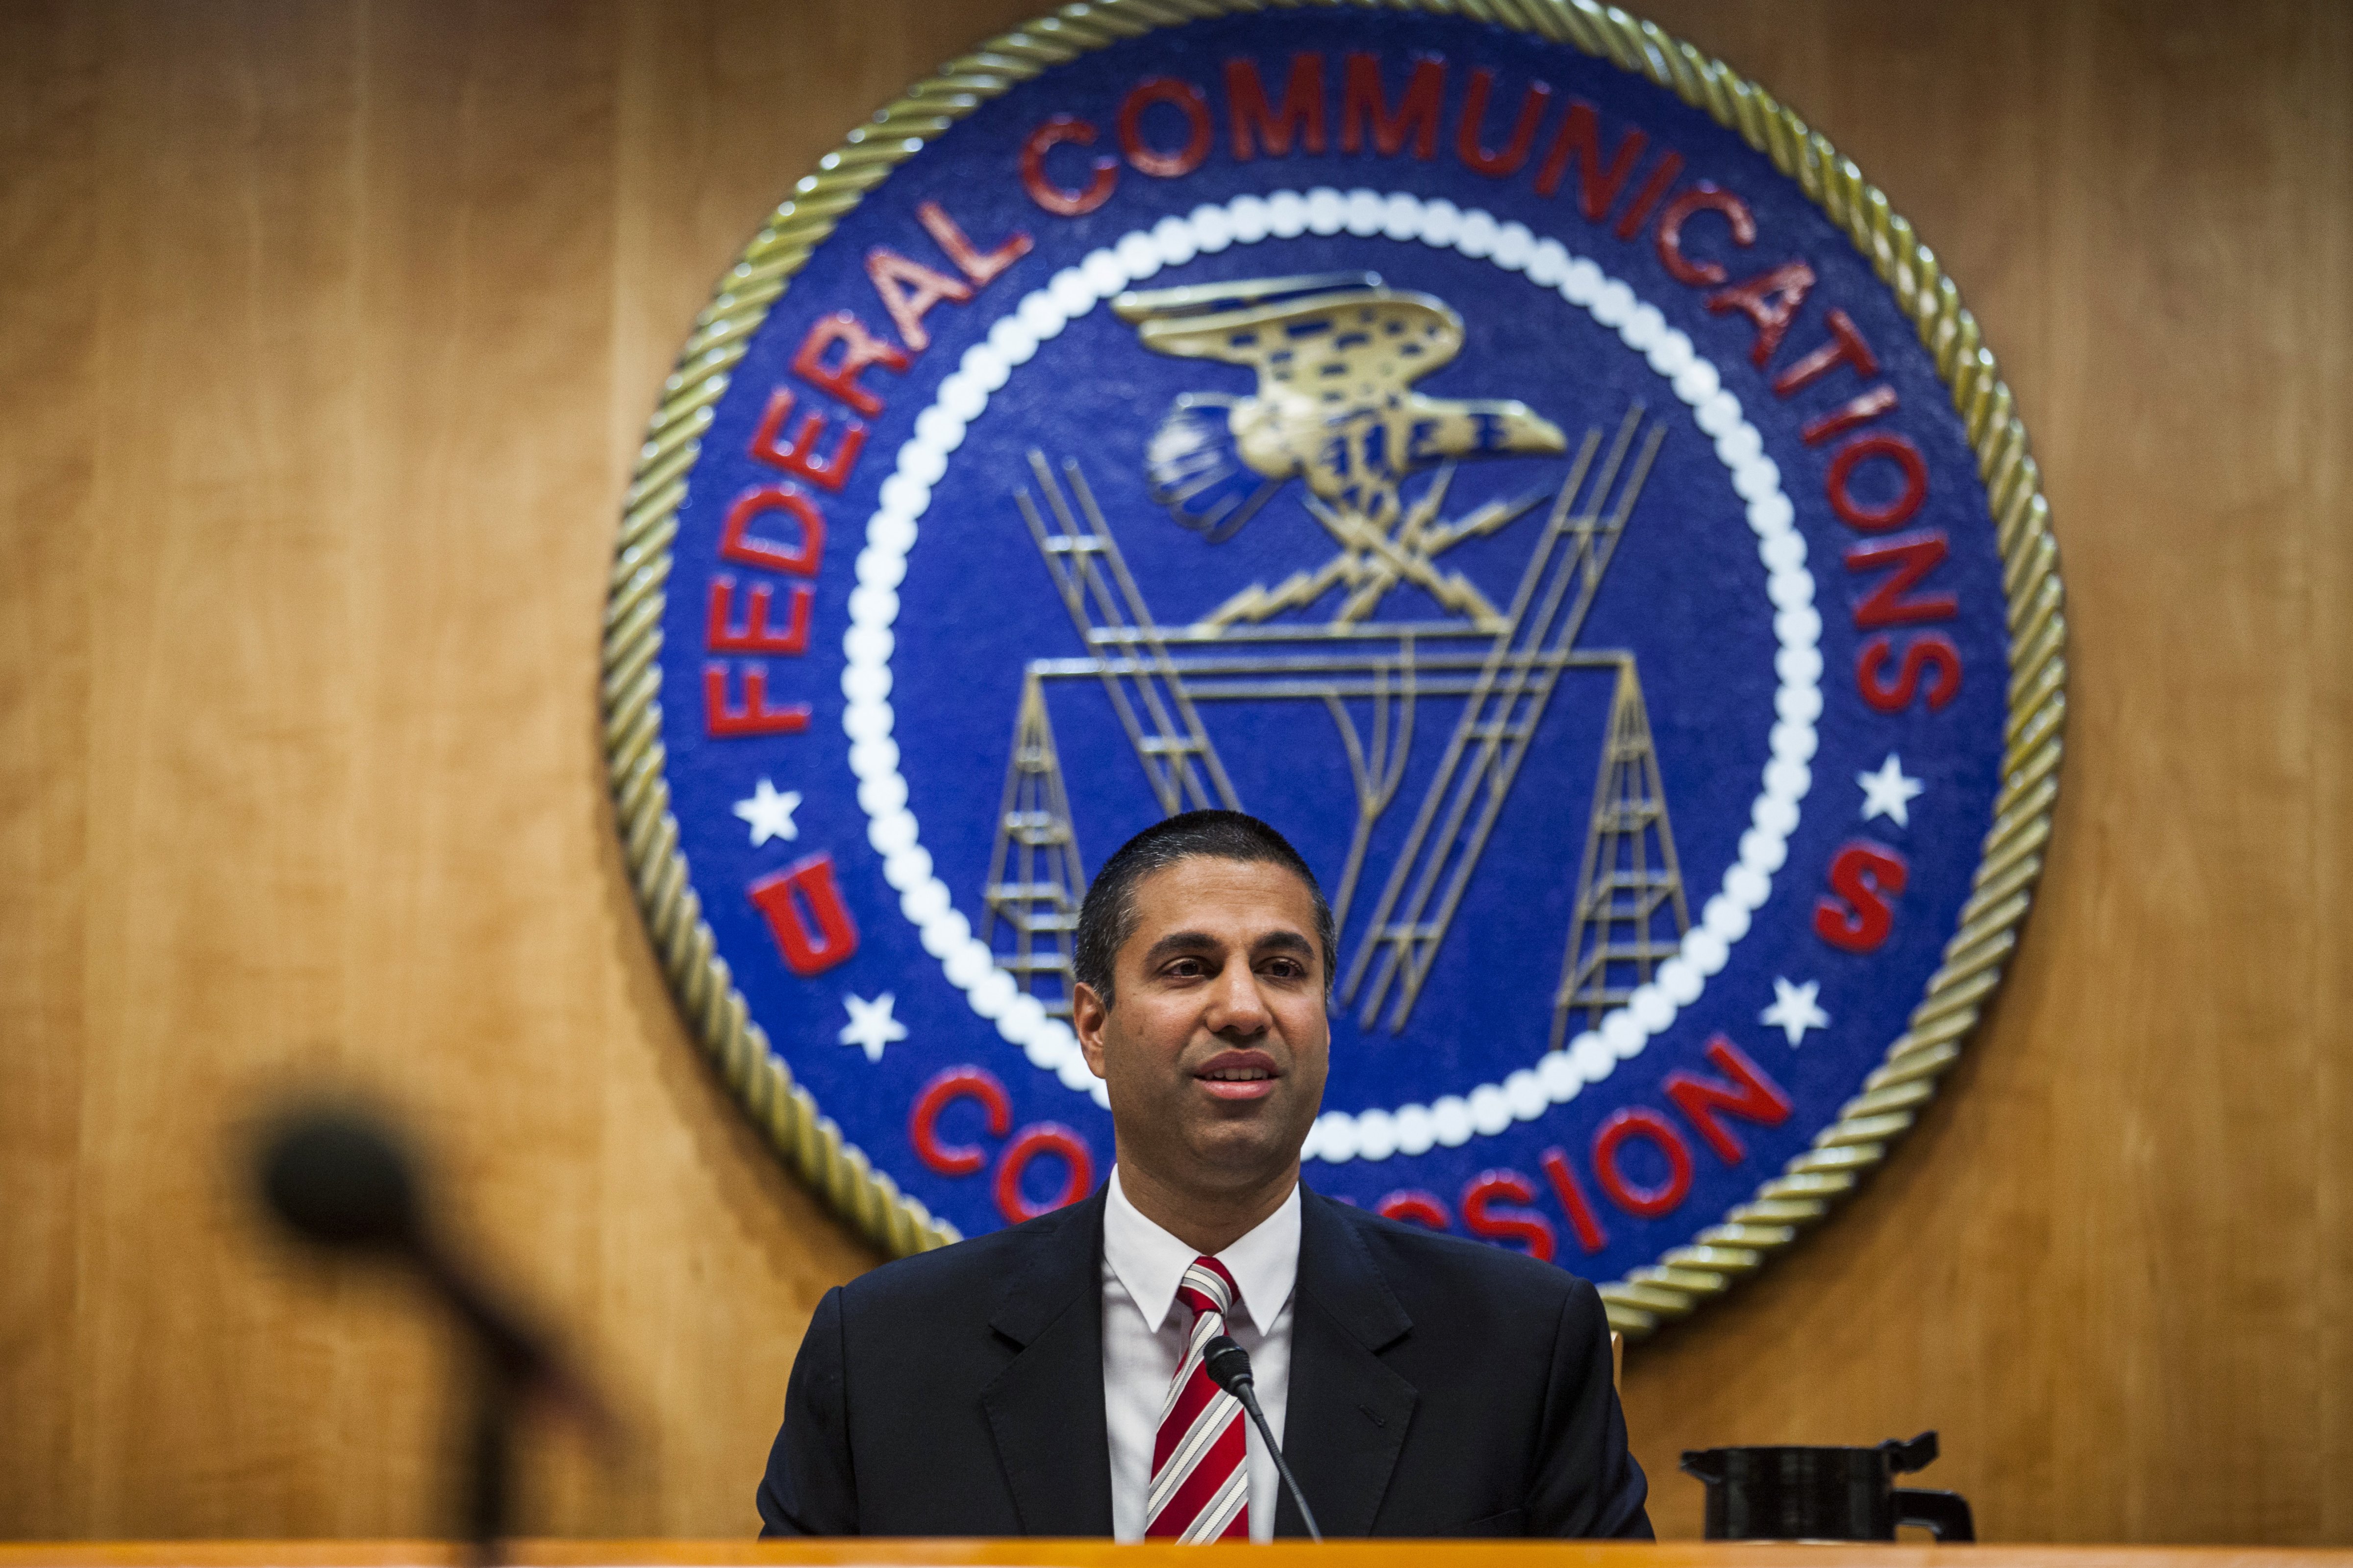 Ajit Pai, chairman of the Federal Communications Commission (FCC), speaks during an open meeting in Washington, D.C., U.S., on Thursday, Nov. 16, 2017. (Zach Gibson&mdash;Bloomberg/Getty Images)